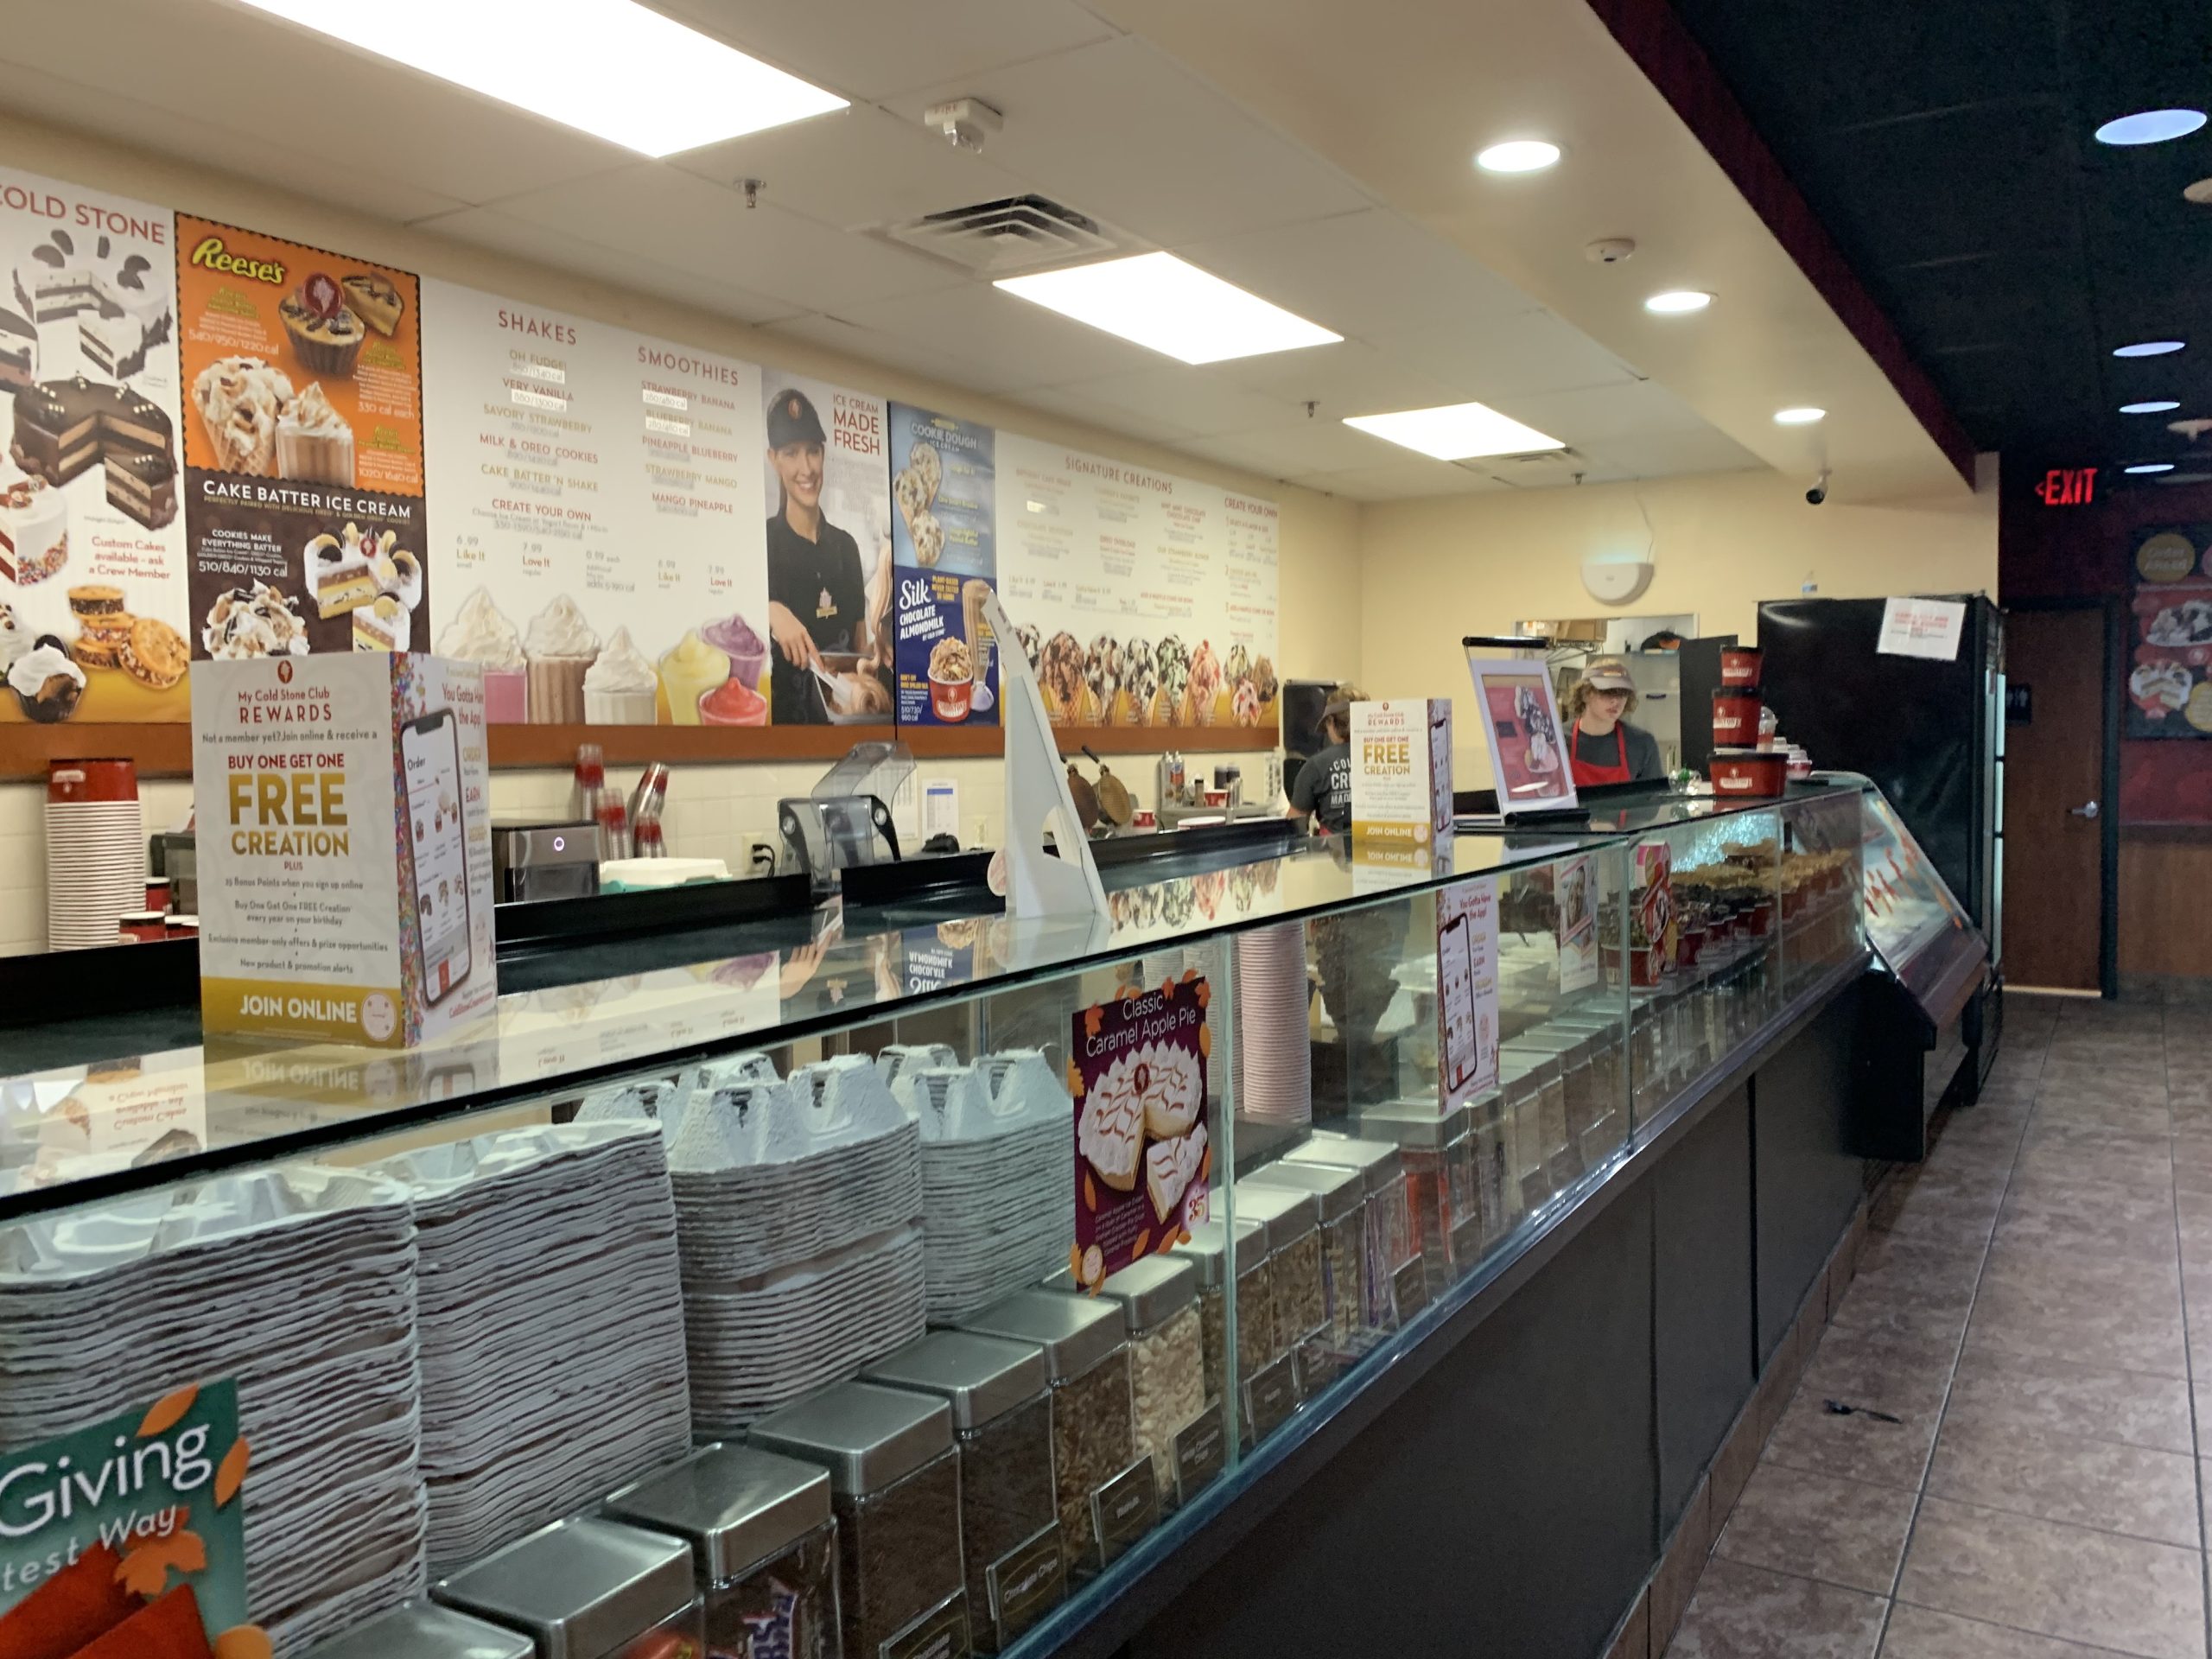 Cold Stone Creamery advertises their fall ice cream flavors to customers.